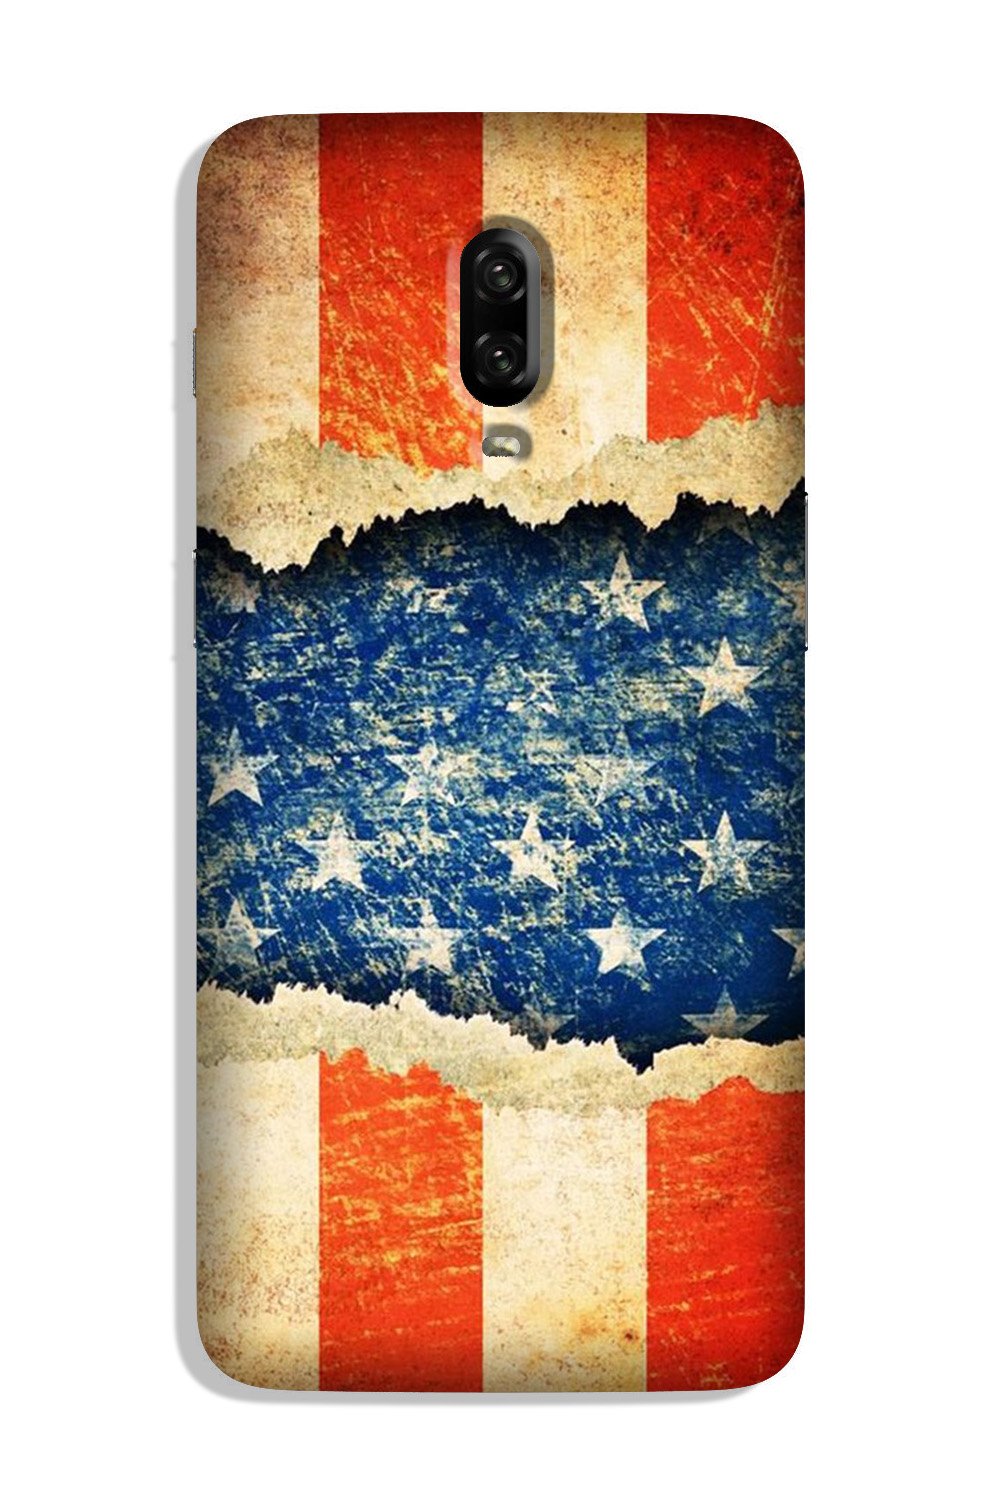 United Kingdom Case for OnePlus 6T